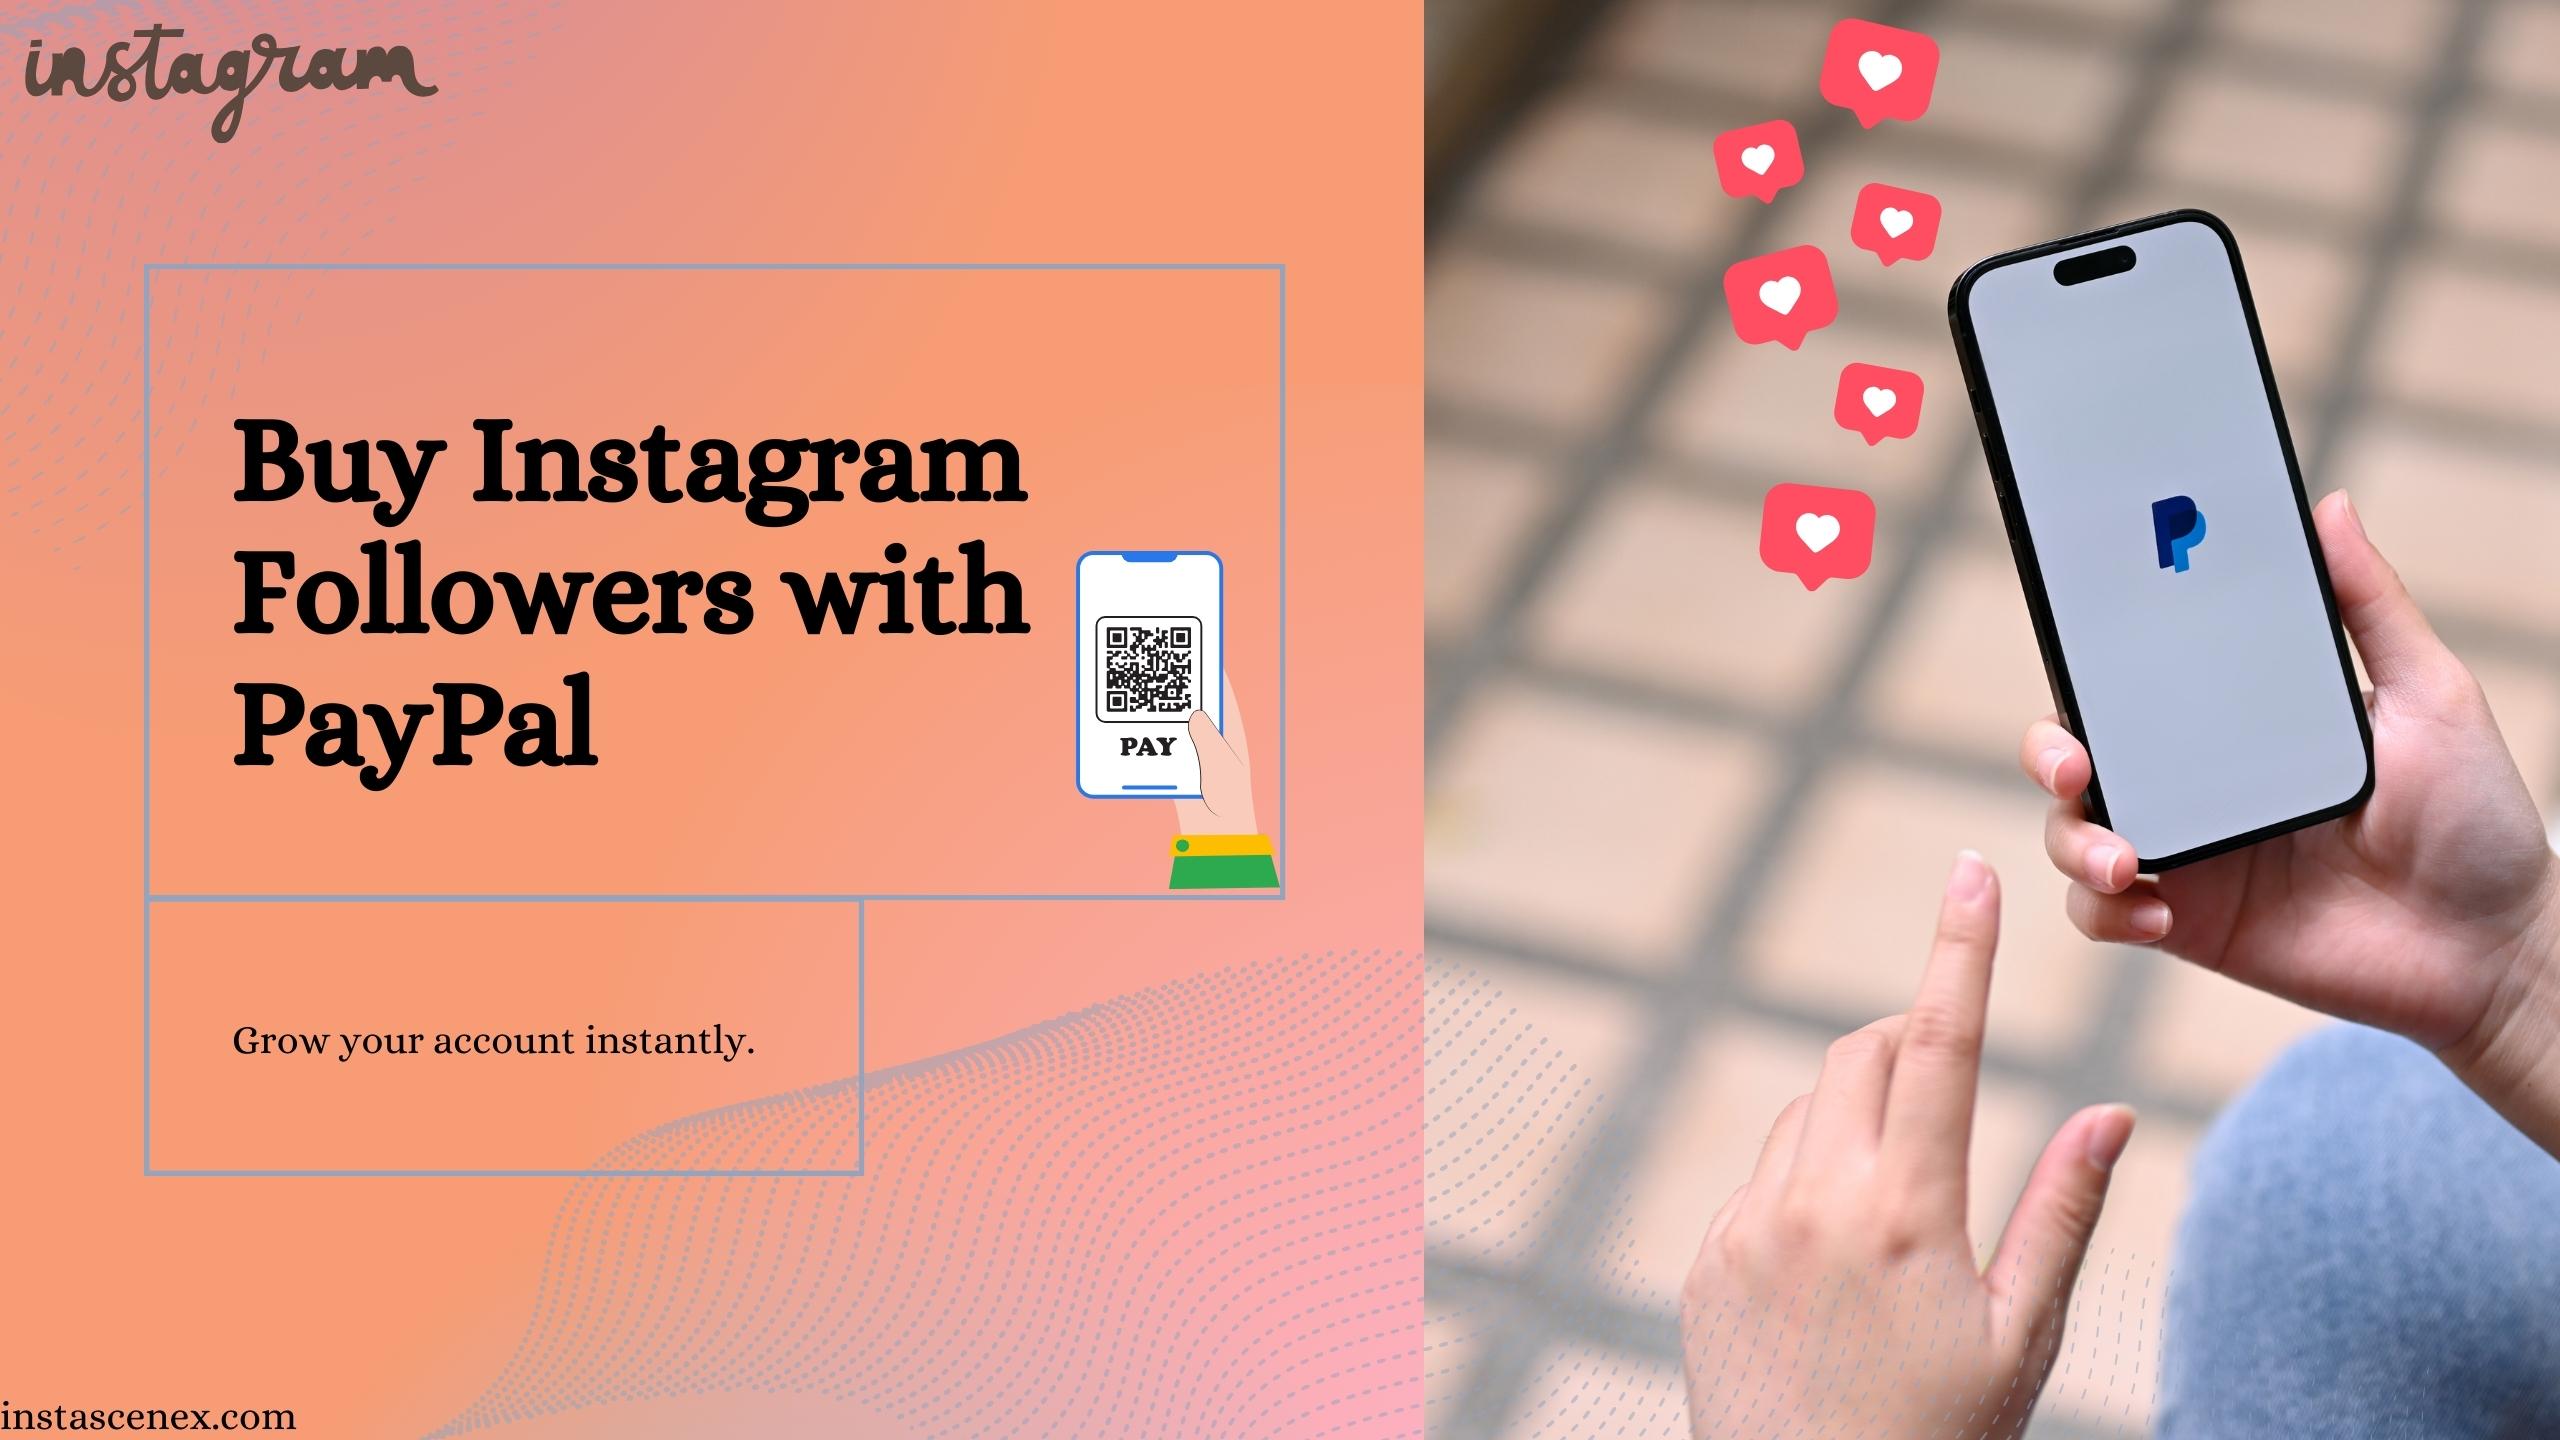 Buy Instagram Followers with PayPal